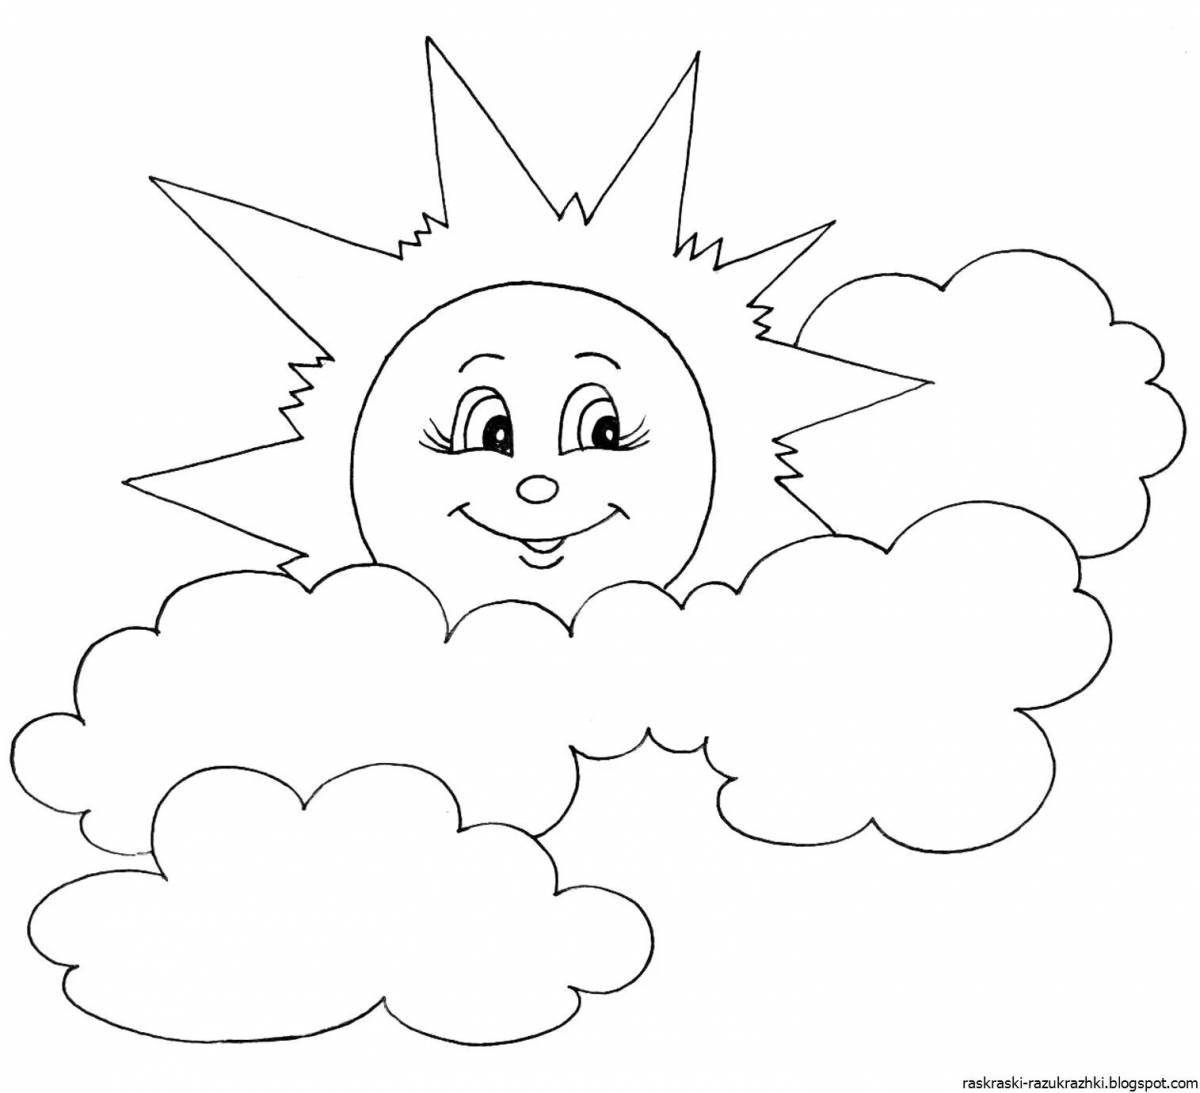 Sparkling sun coloring book for children 3-4 years old